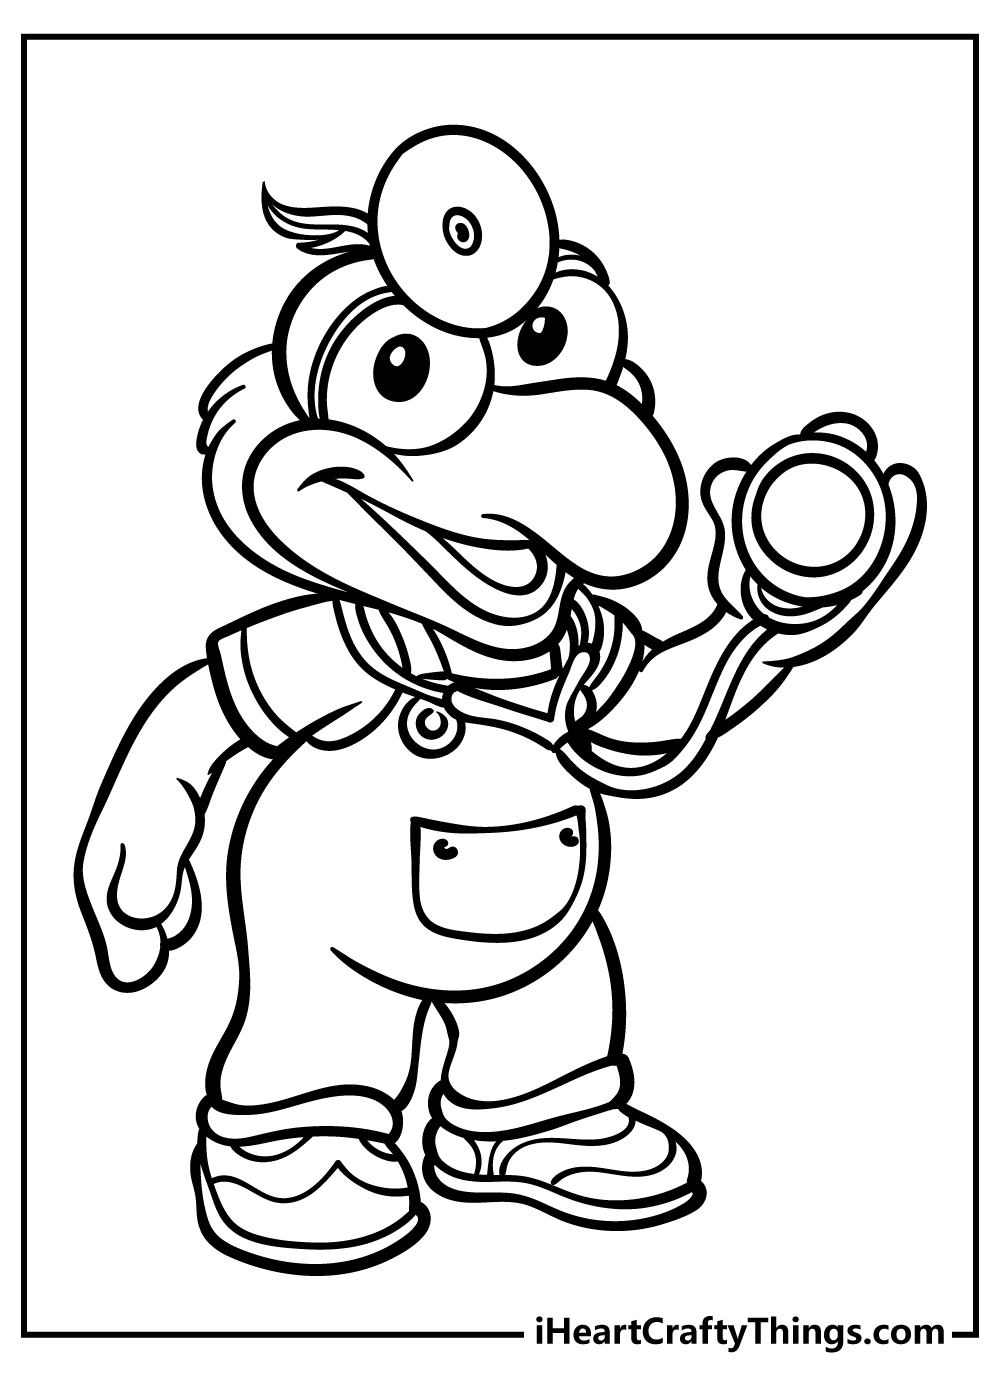 Muppet Babies Coloring Book for kids free printable